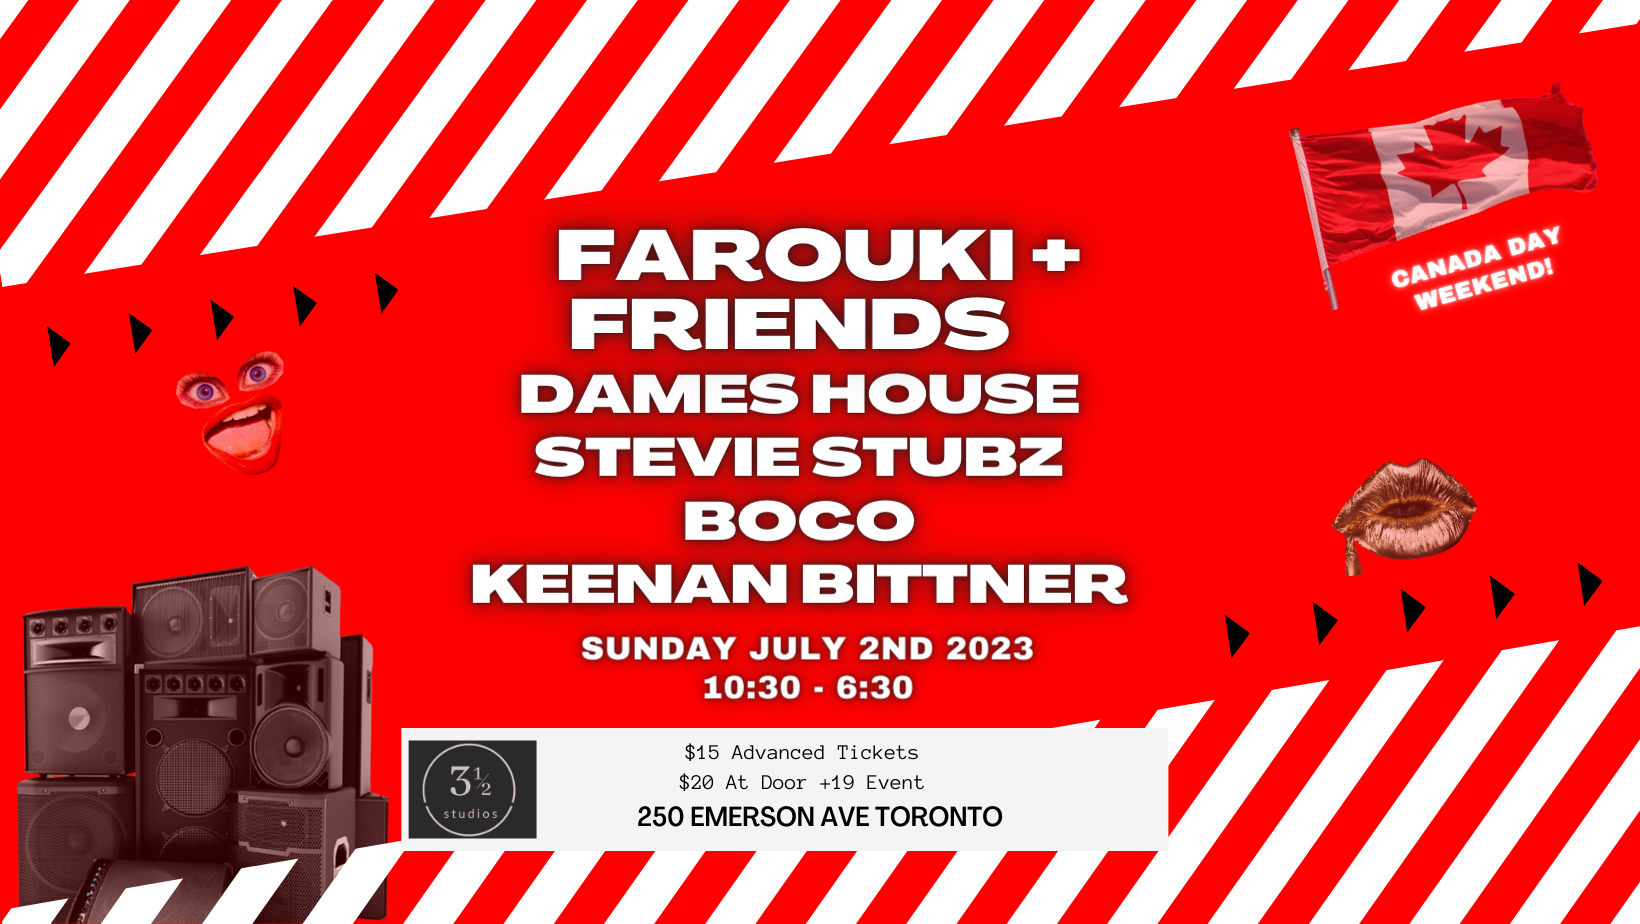 Farouki + Friends: Sunday July 2nd Canada Day Weekend Edition - フライヤー表